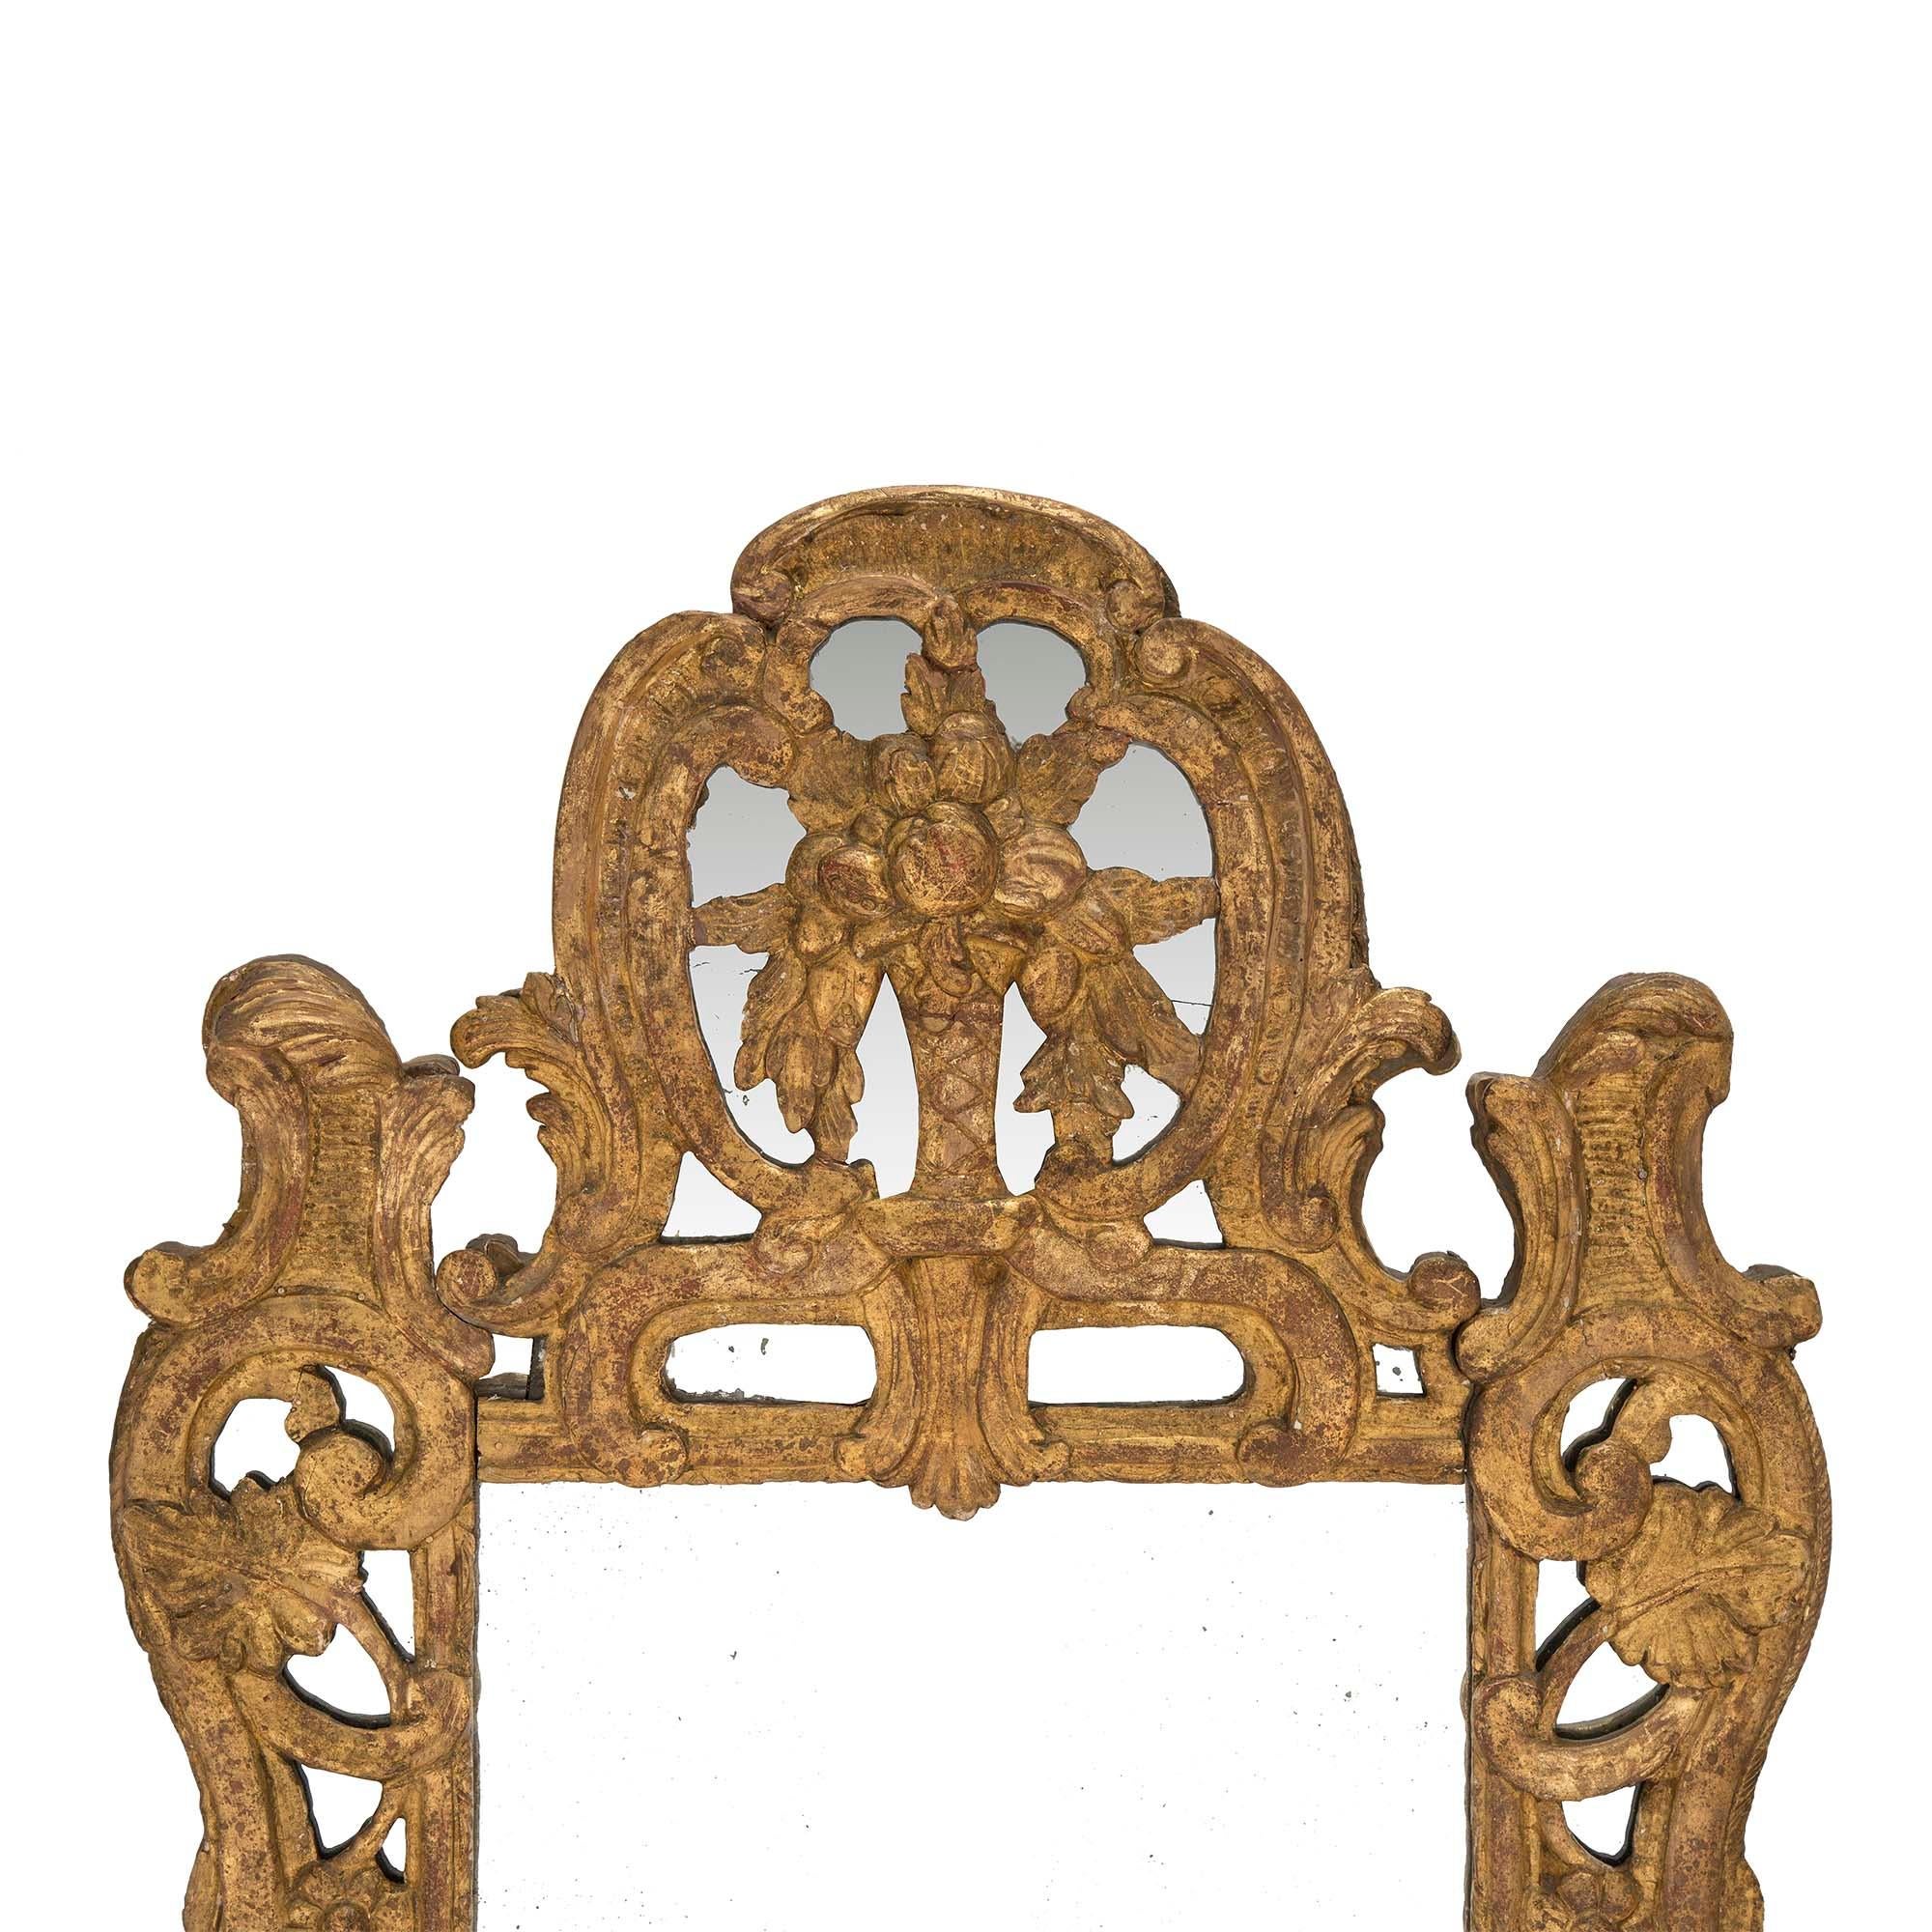 French 18th Century Régence Period Giltwood Mirror In Good Condition For Sale In West Palm Beach, FL